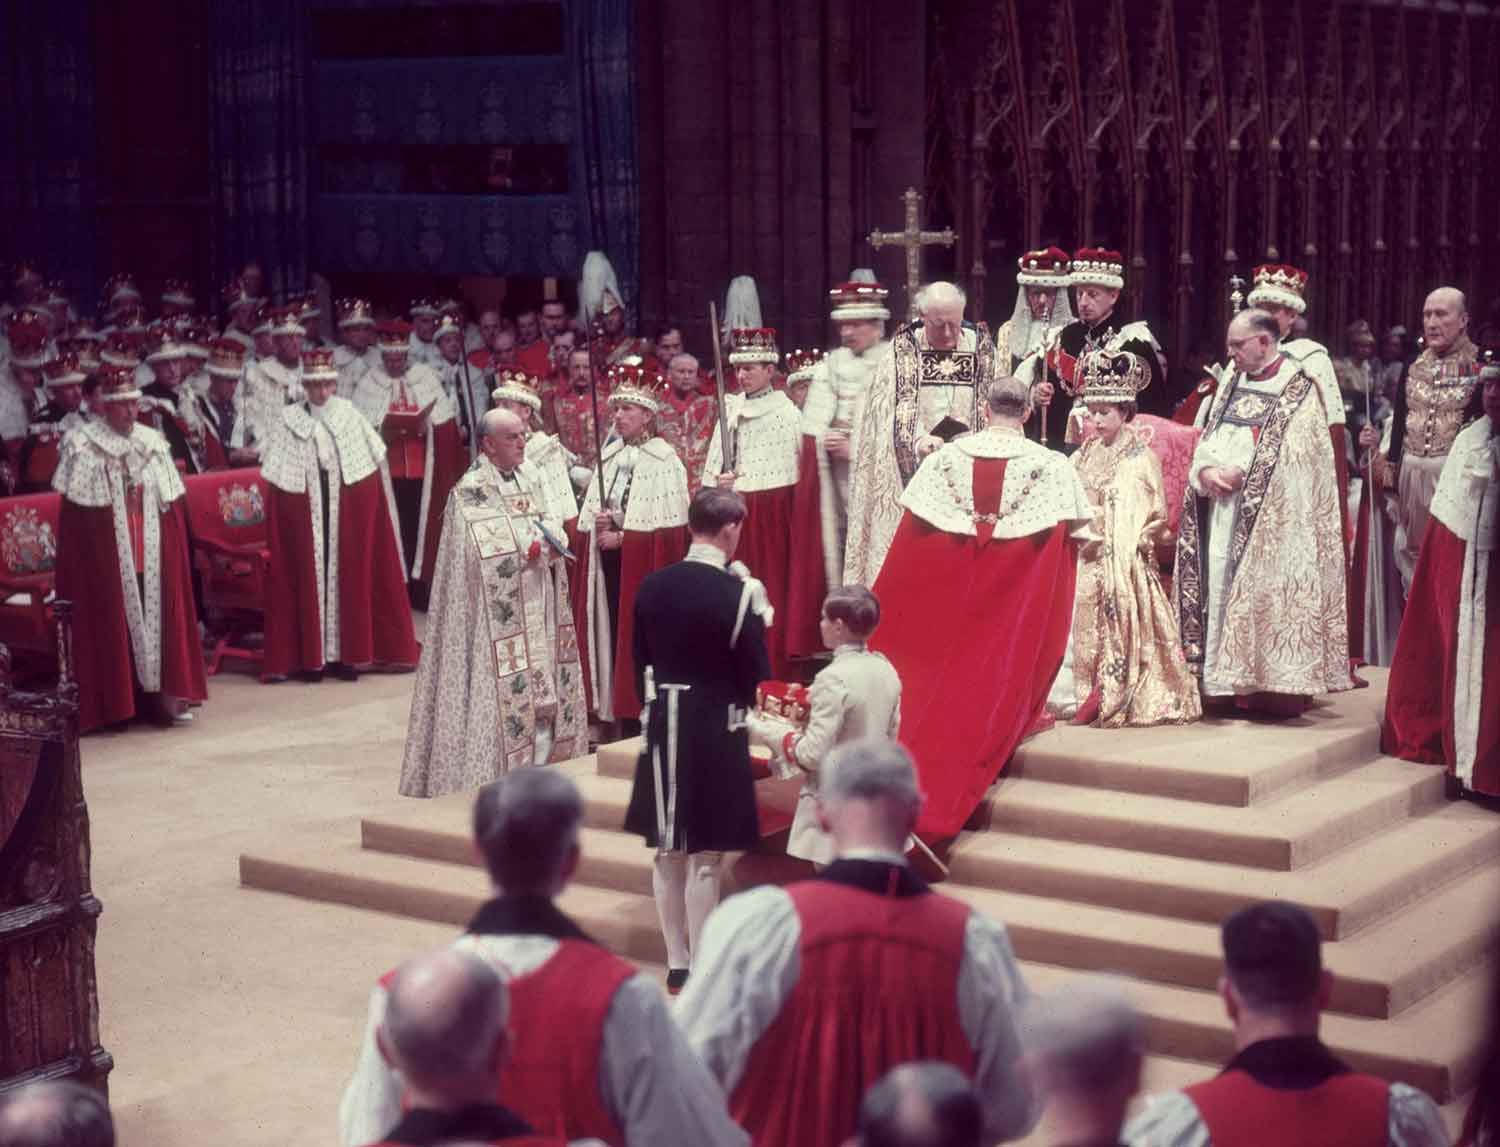 Queen Elizabeth sits on a throne as many religious figures in robes stand before and around her.